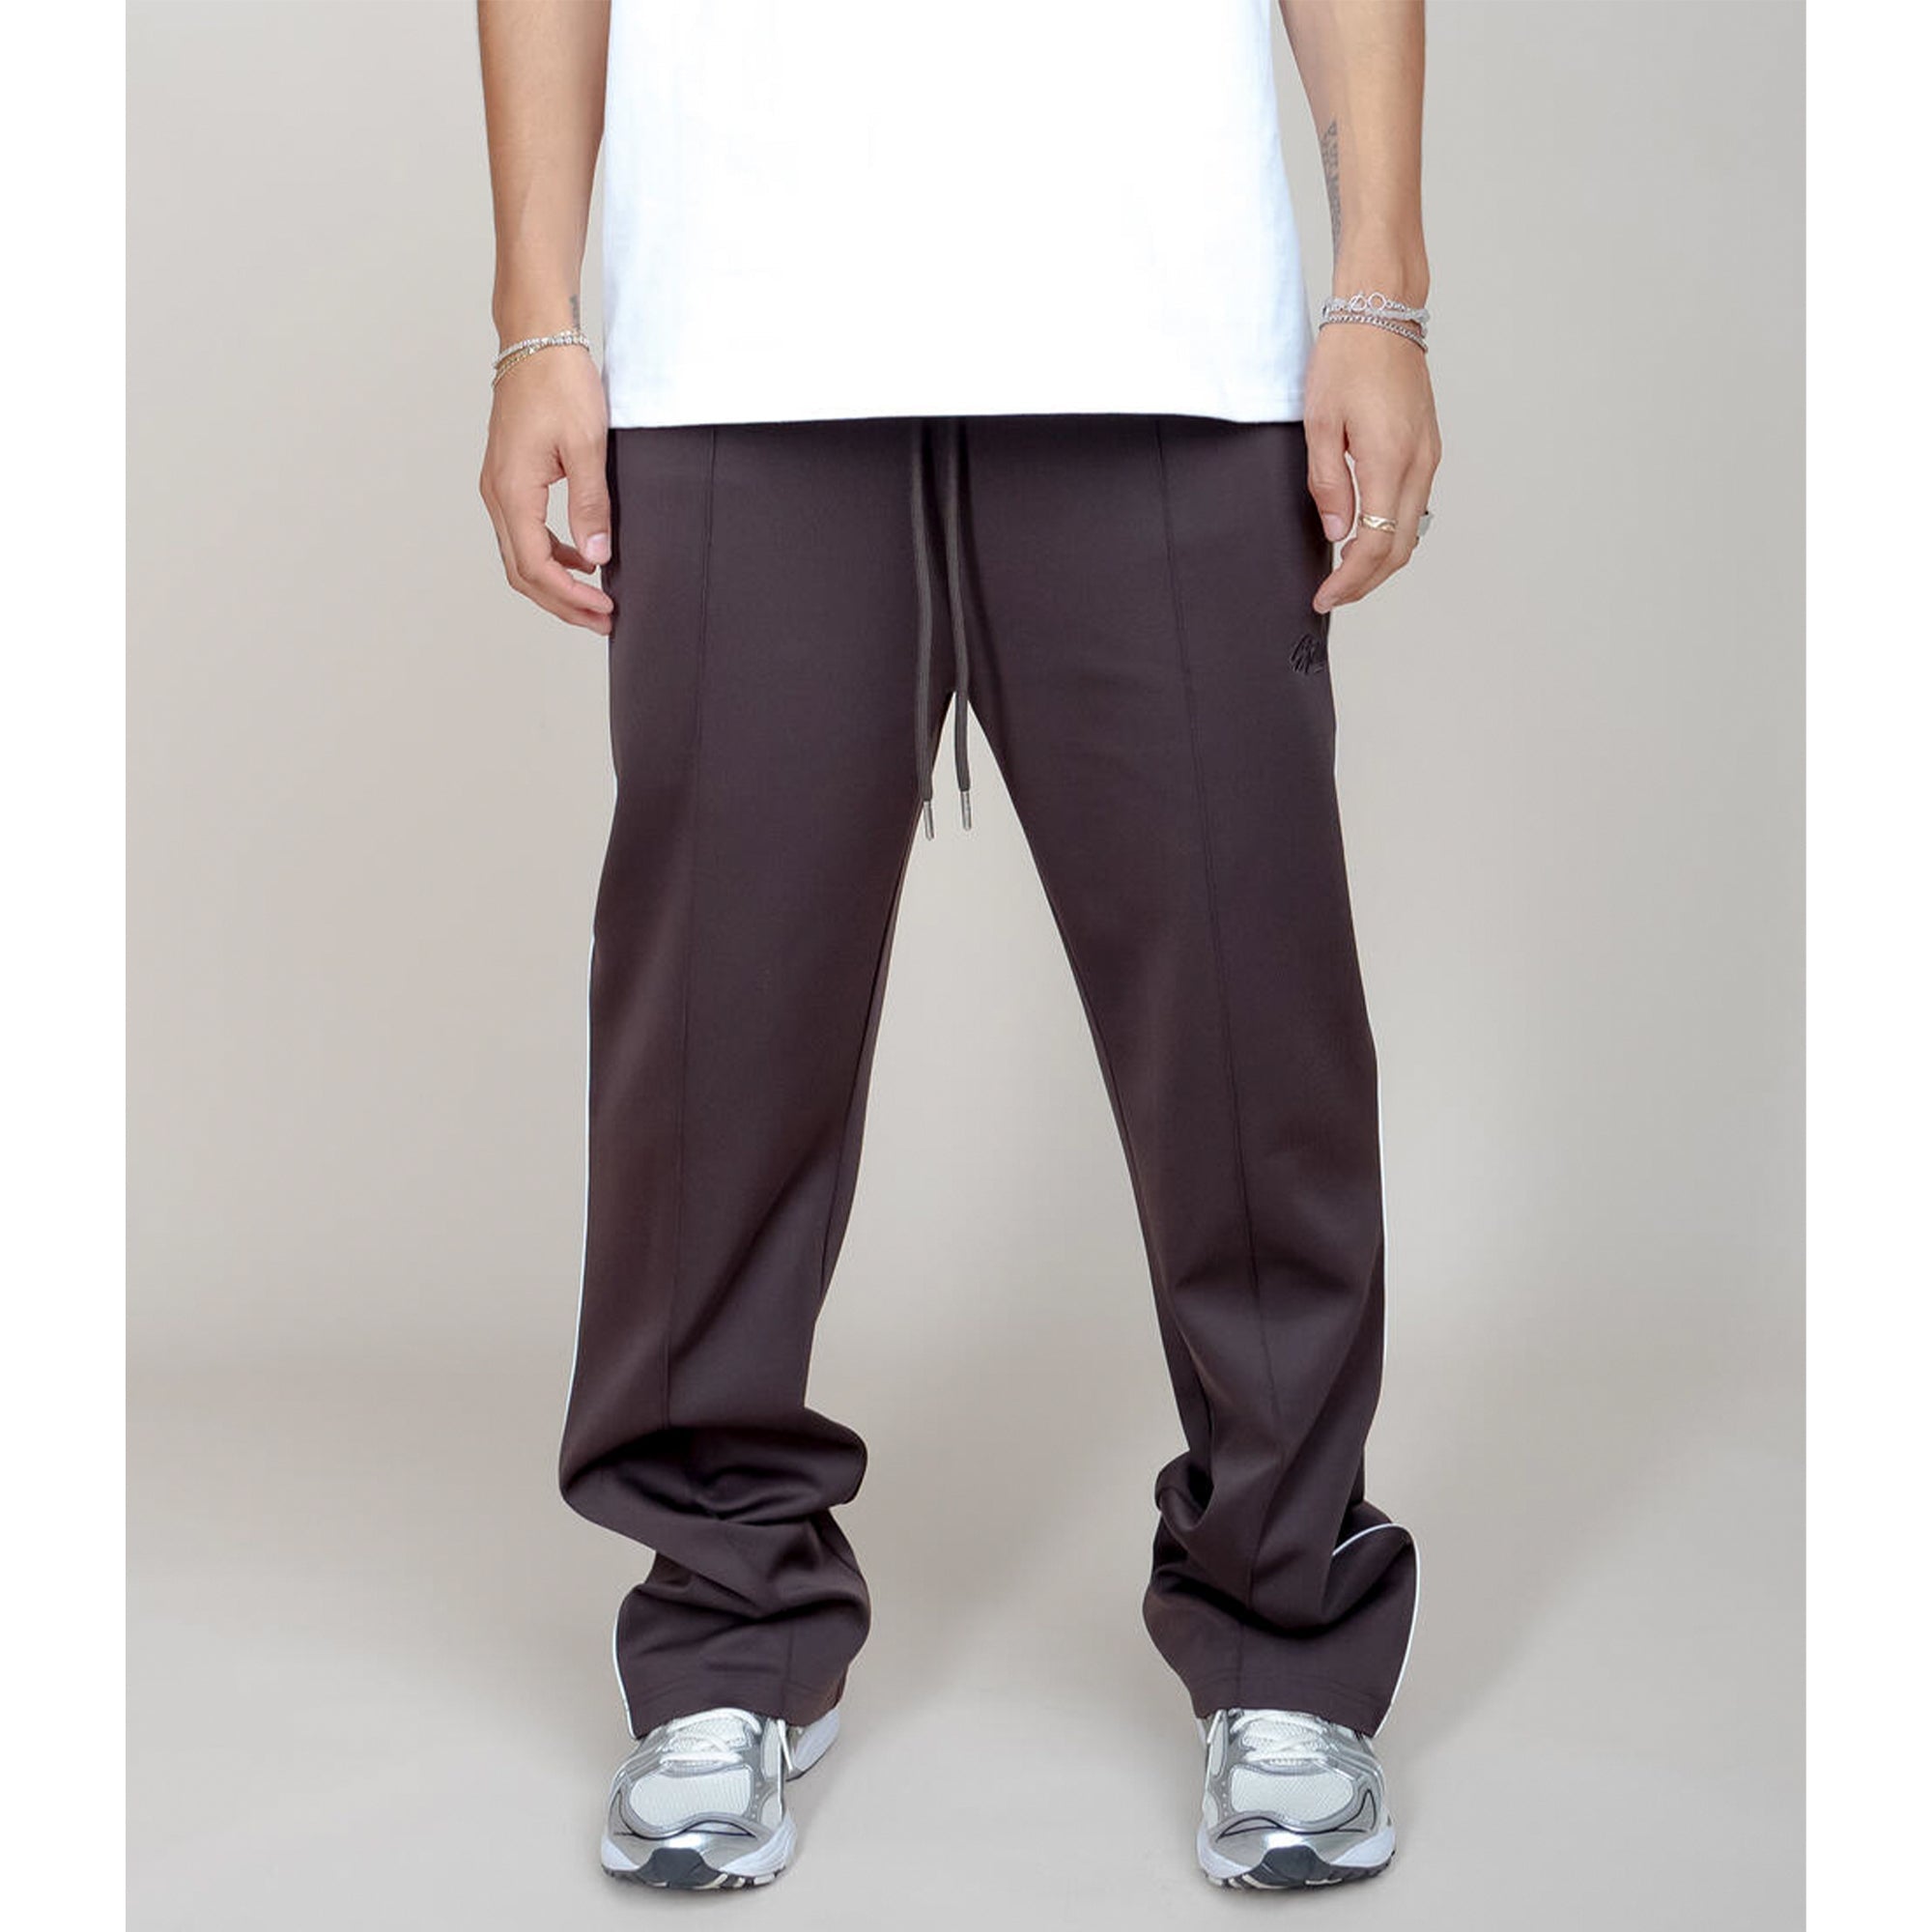 EPTM Unisex Perfect Piping Track Pants (Brown)-Nexus Clothing